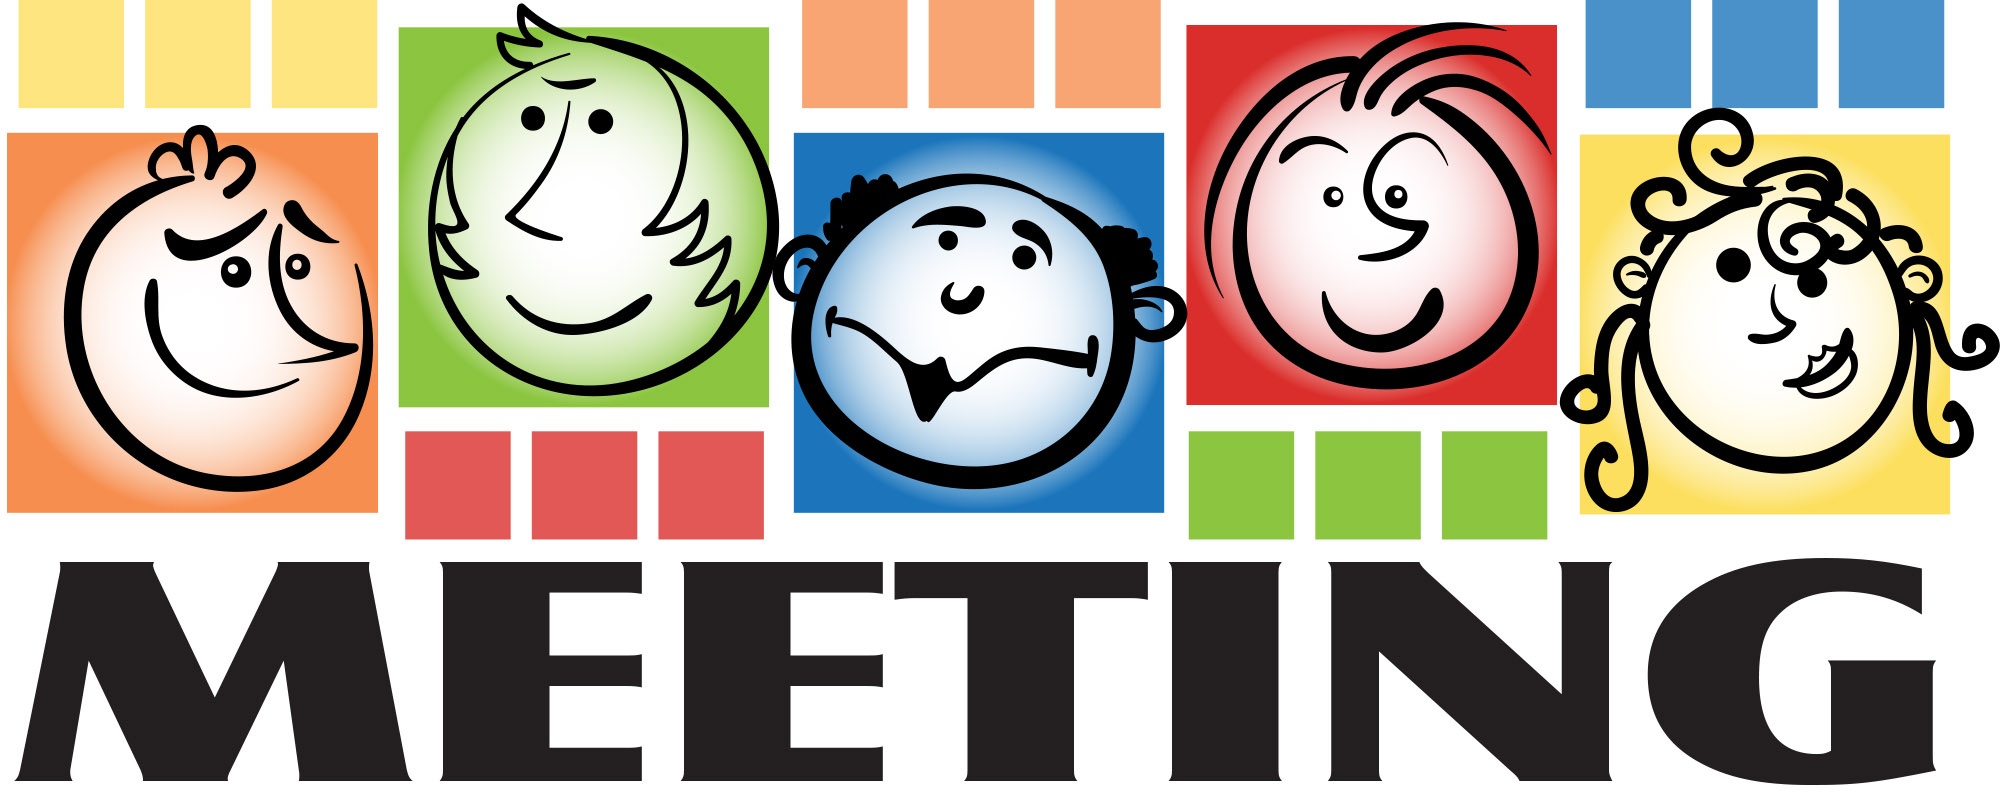 clipart meeting - photo #21